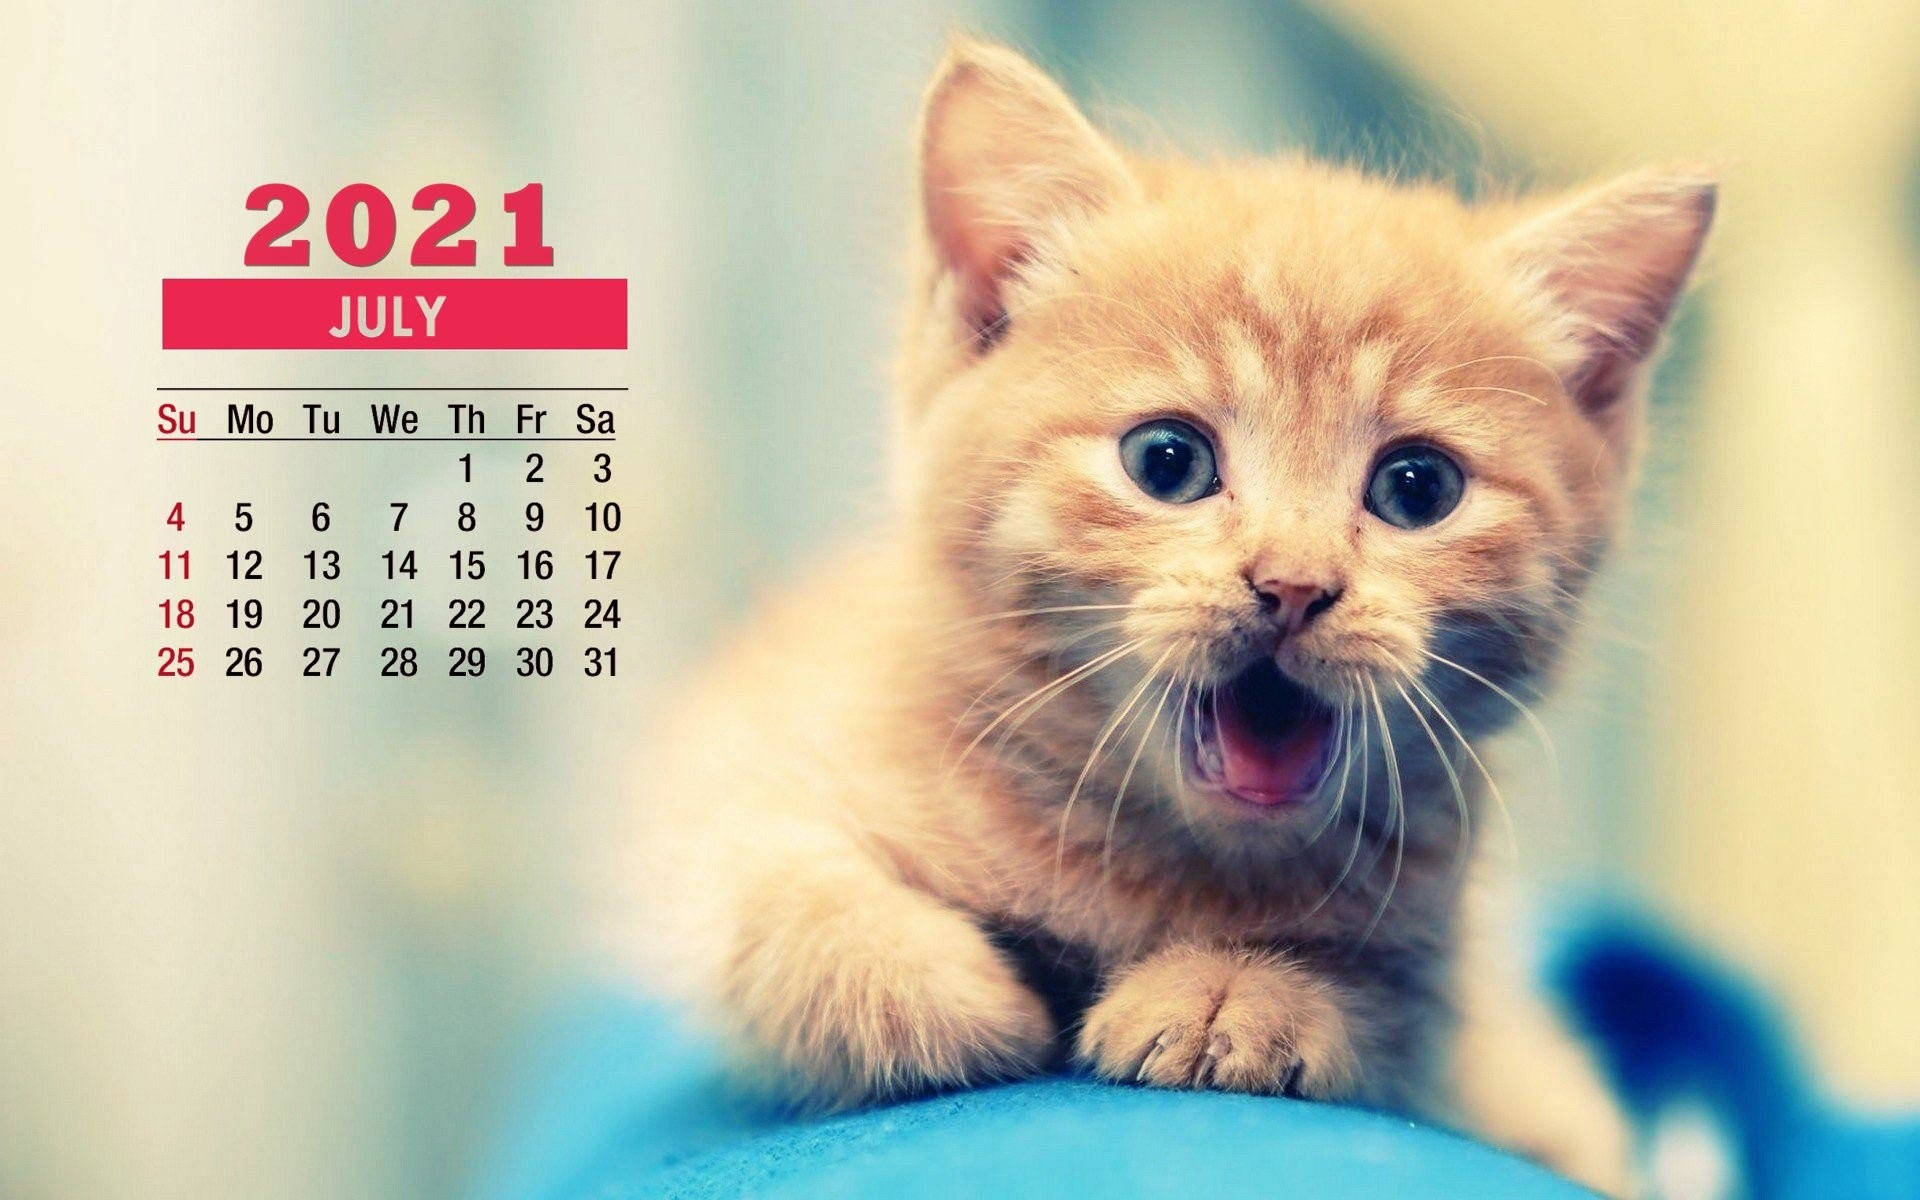 Enjoy the sunshine with this adorable kitten in July! Wallpaper